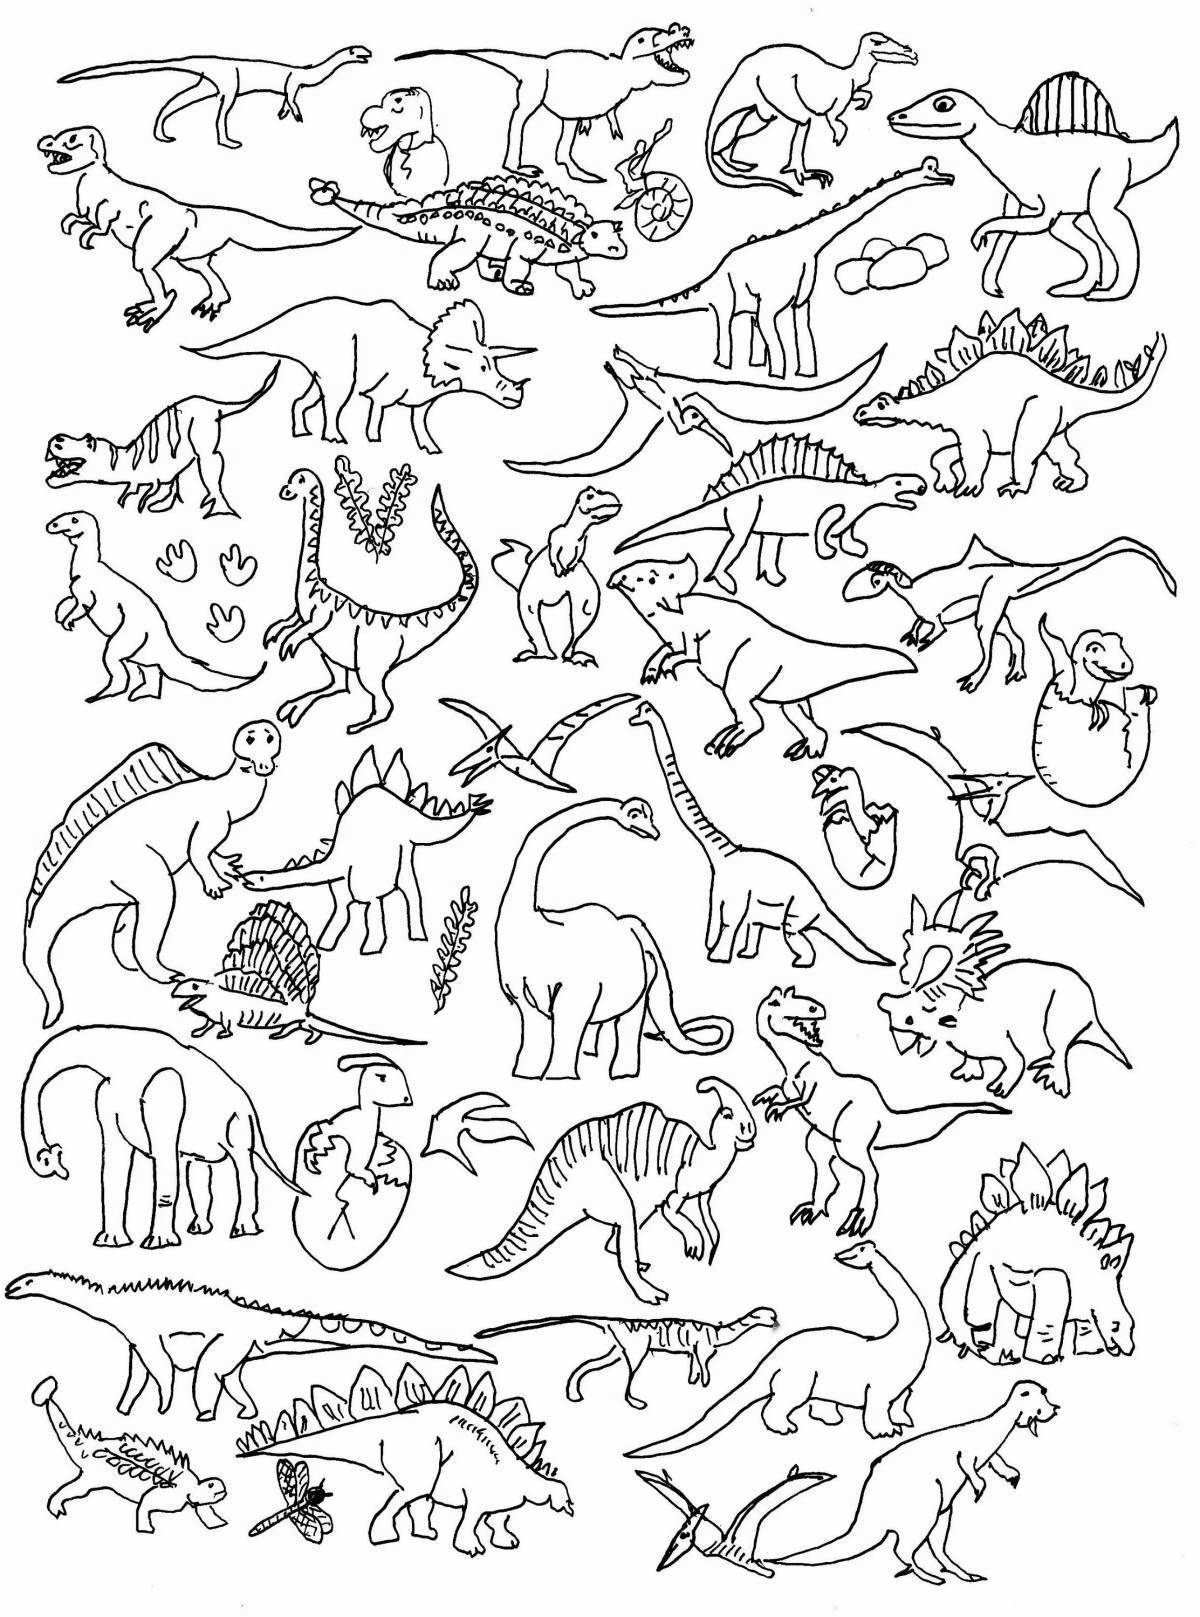 Dazzling coloring dinosaurs all